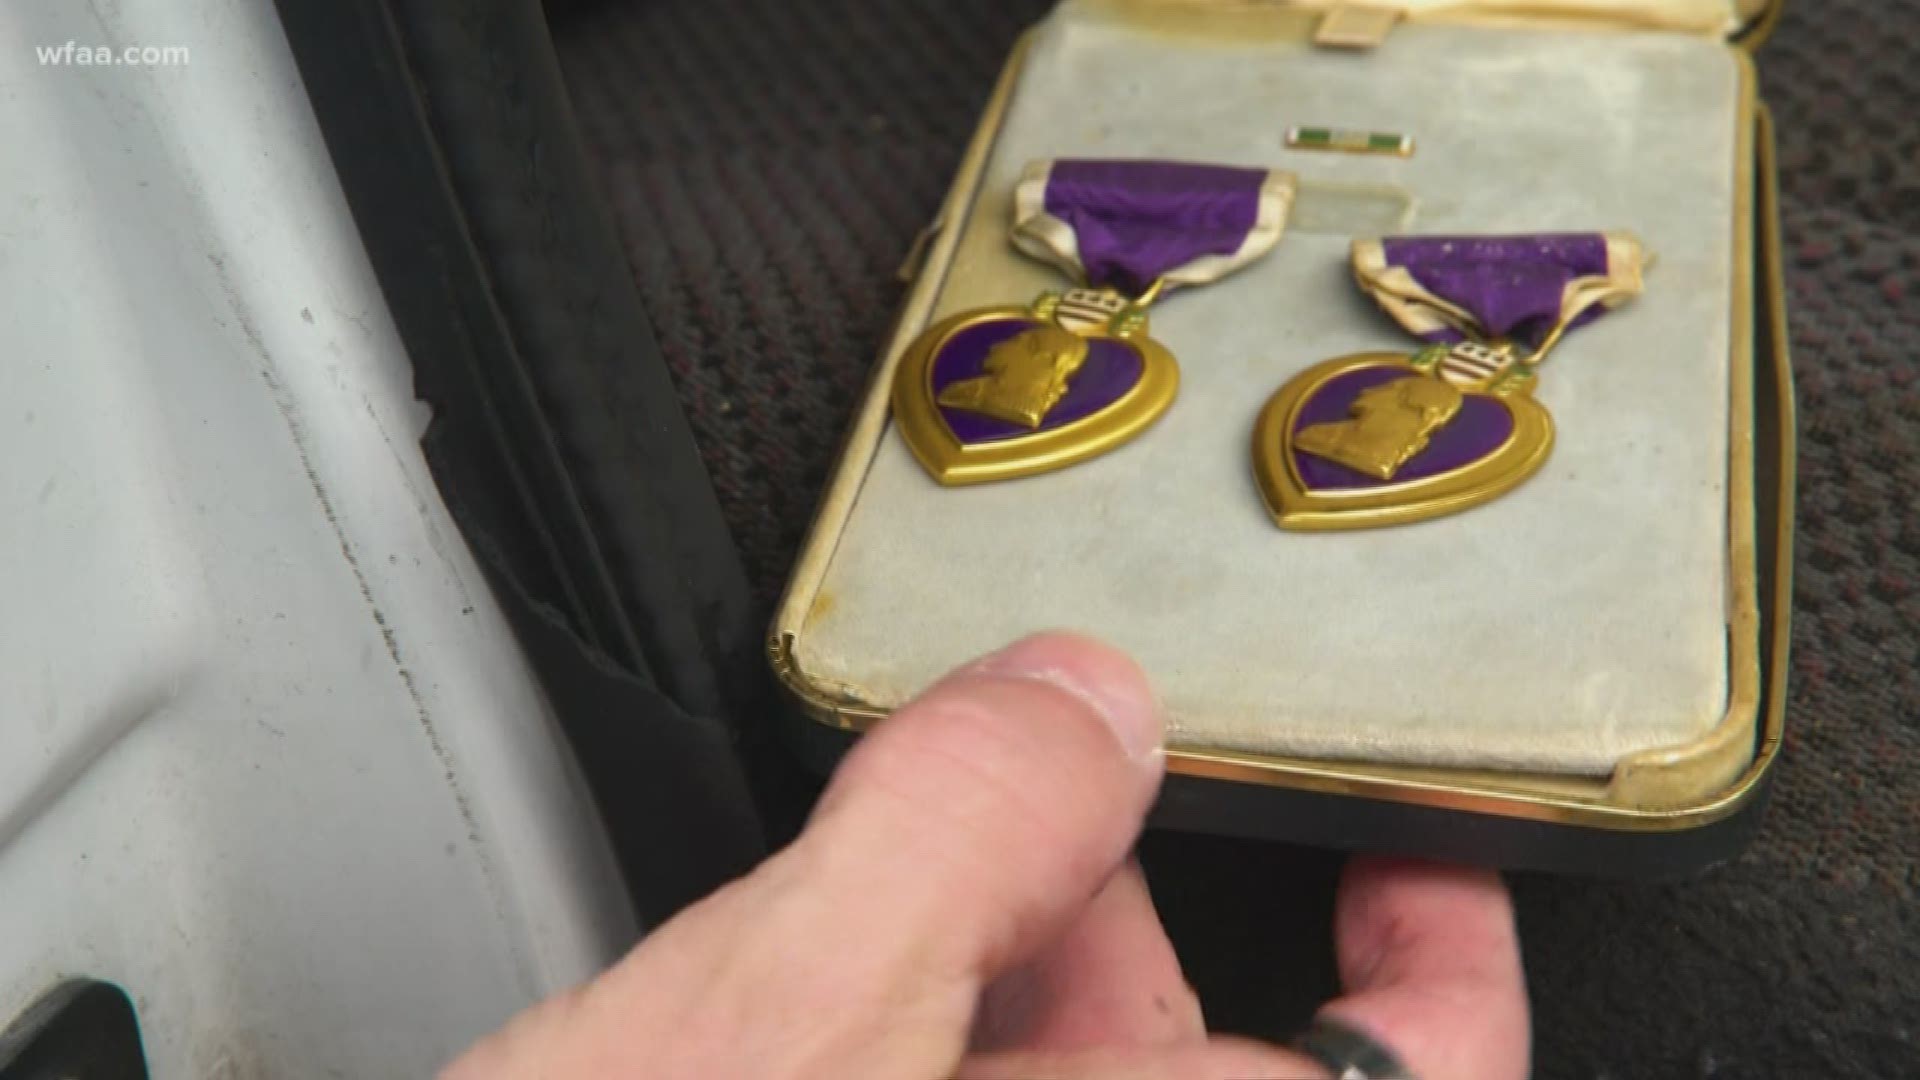 Willie Dimes unknowingly purchased the military medals in a box of items at an auction. He'd like the public's help to find the soldier they belong to.